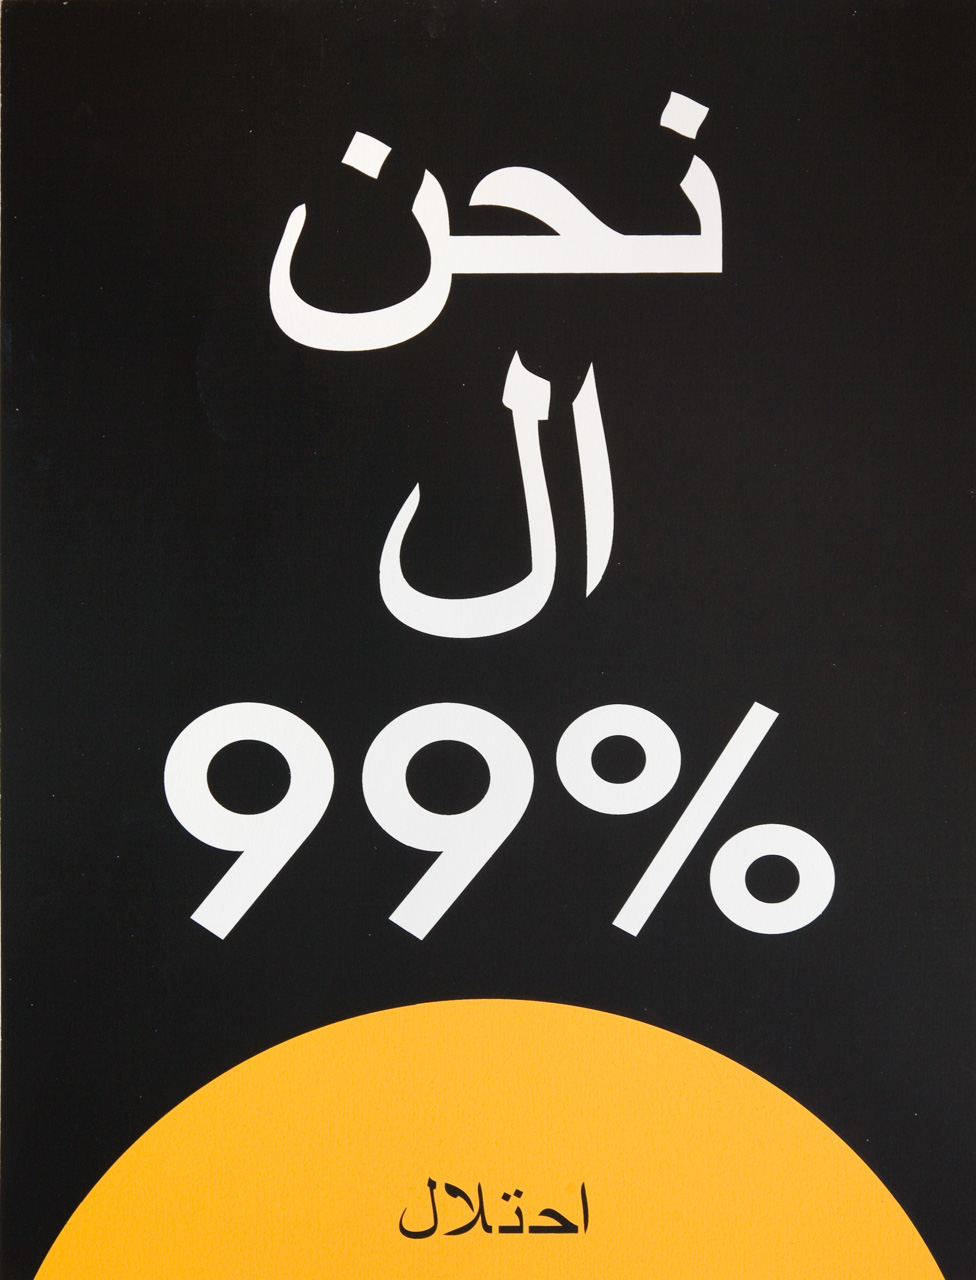 We are the 99%, Arabic